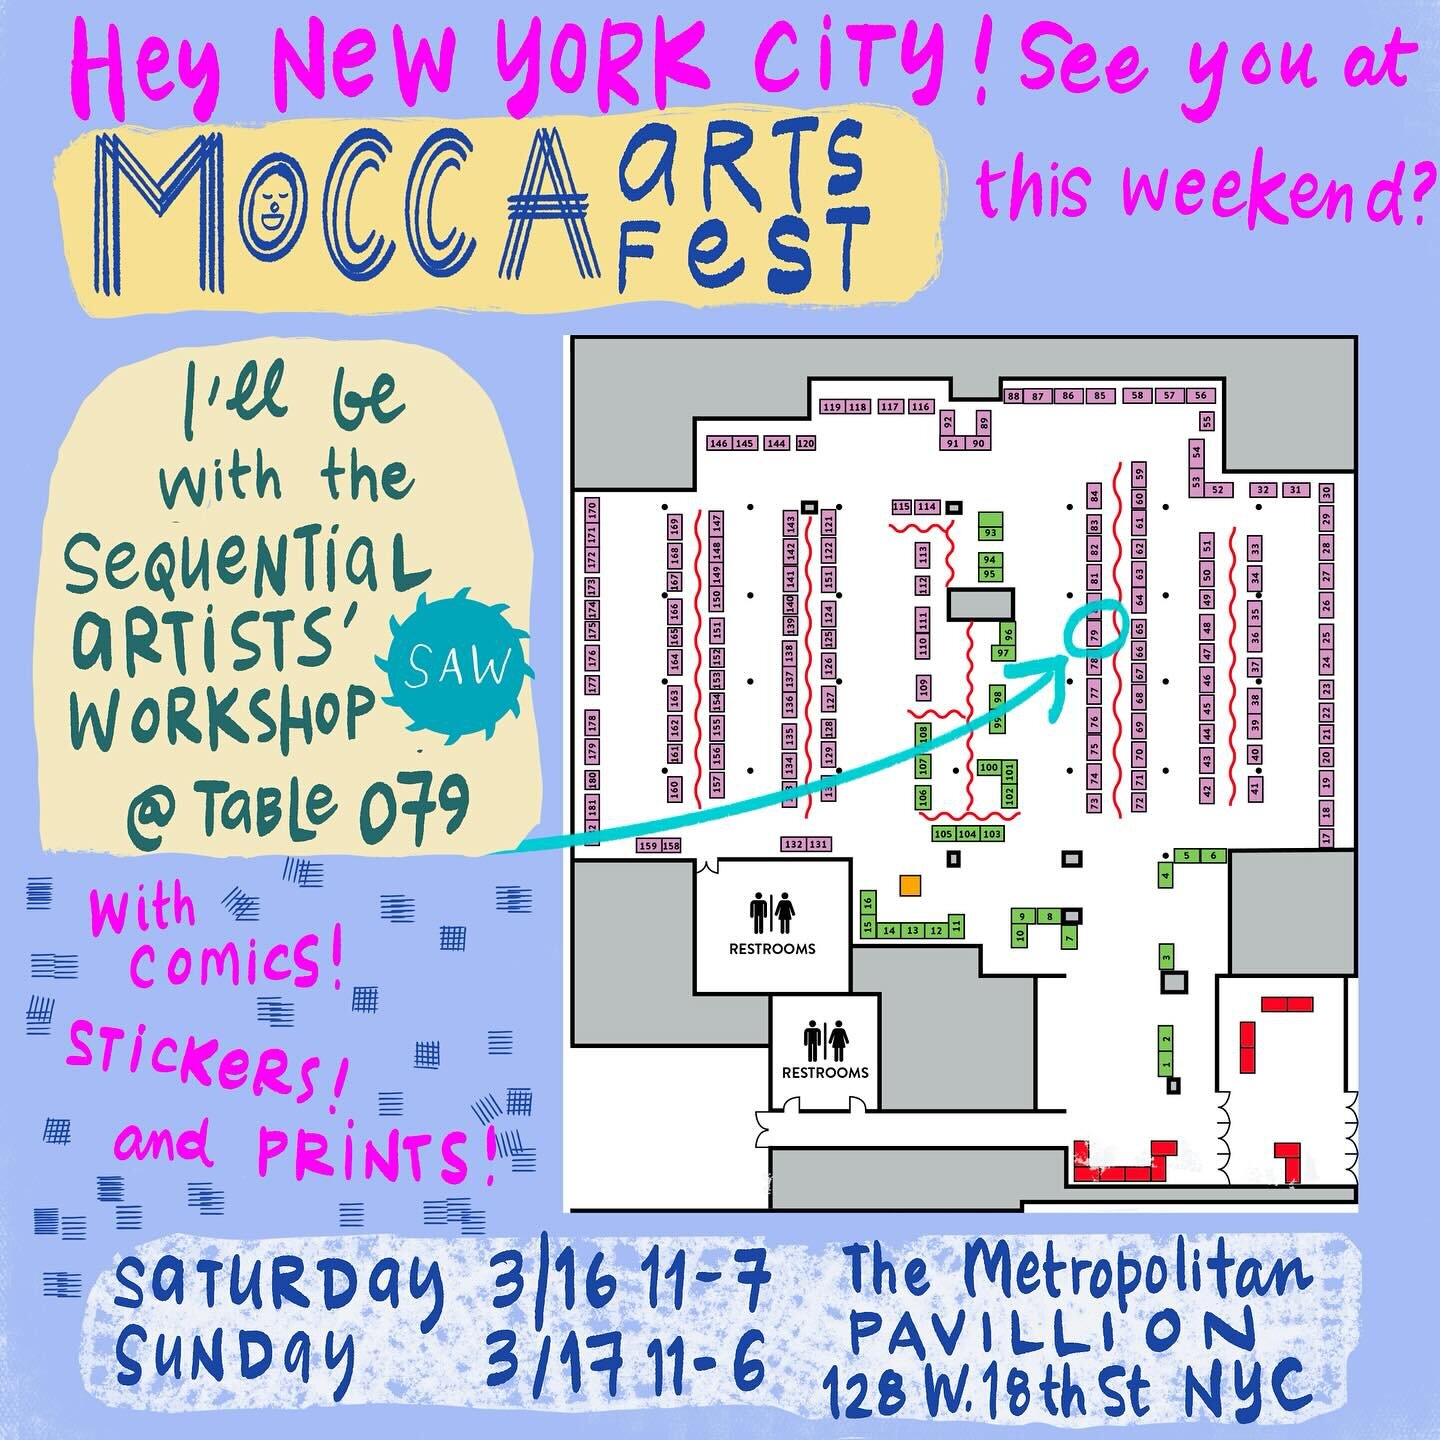 Are you planning on going to @soi128 MoCCAfest this weekend? Stop by and say hello to me and @comicsworkshop !